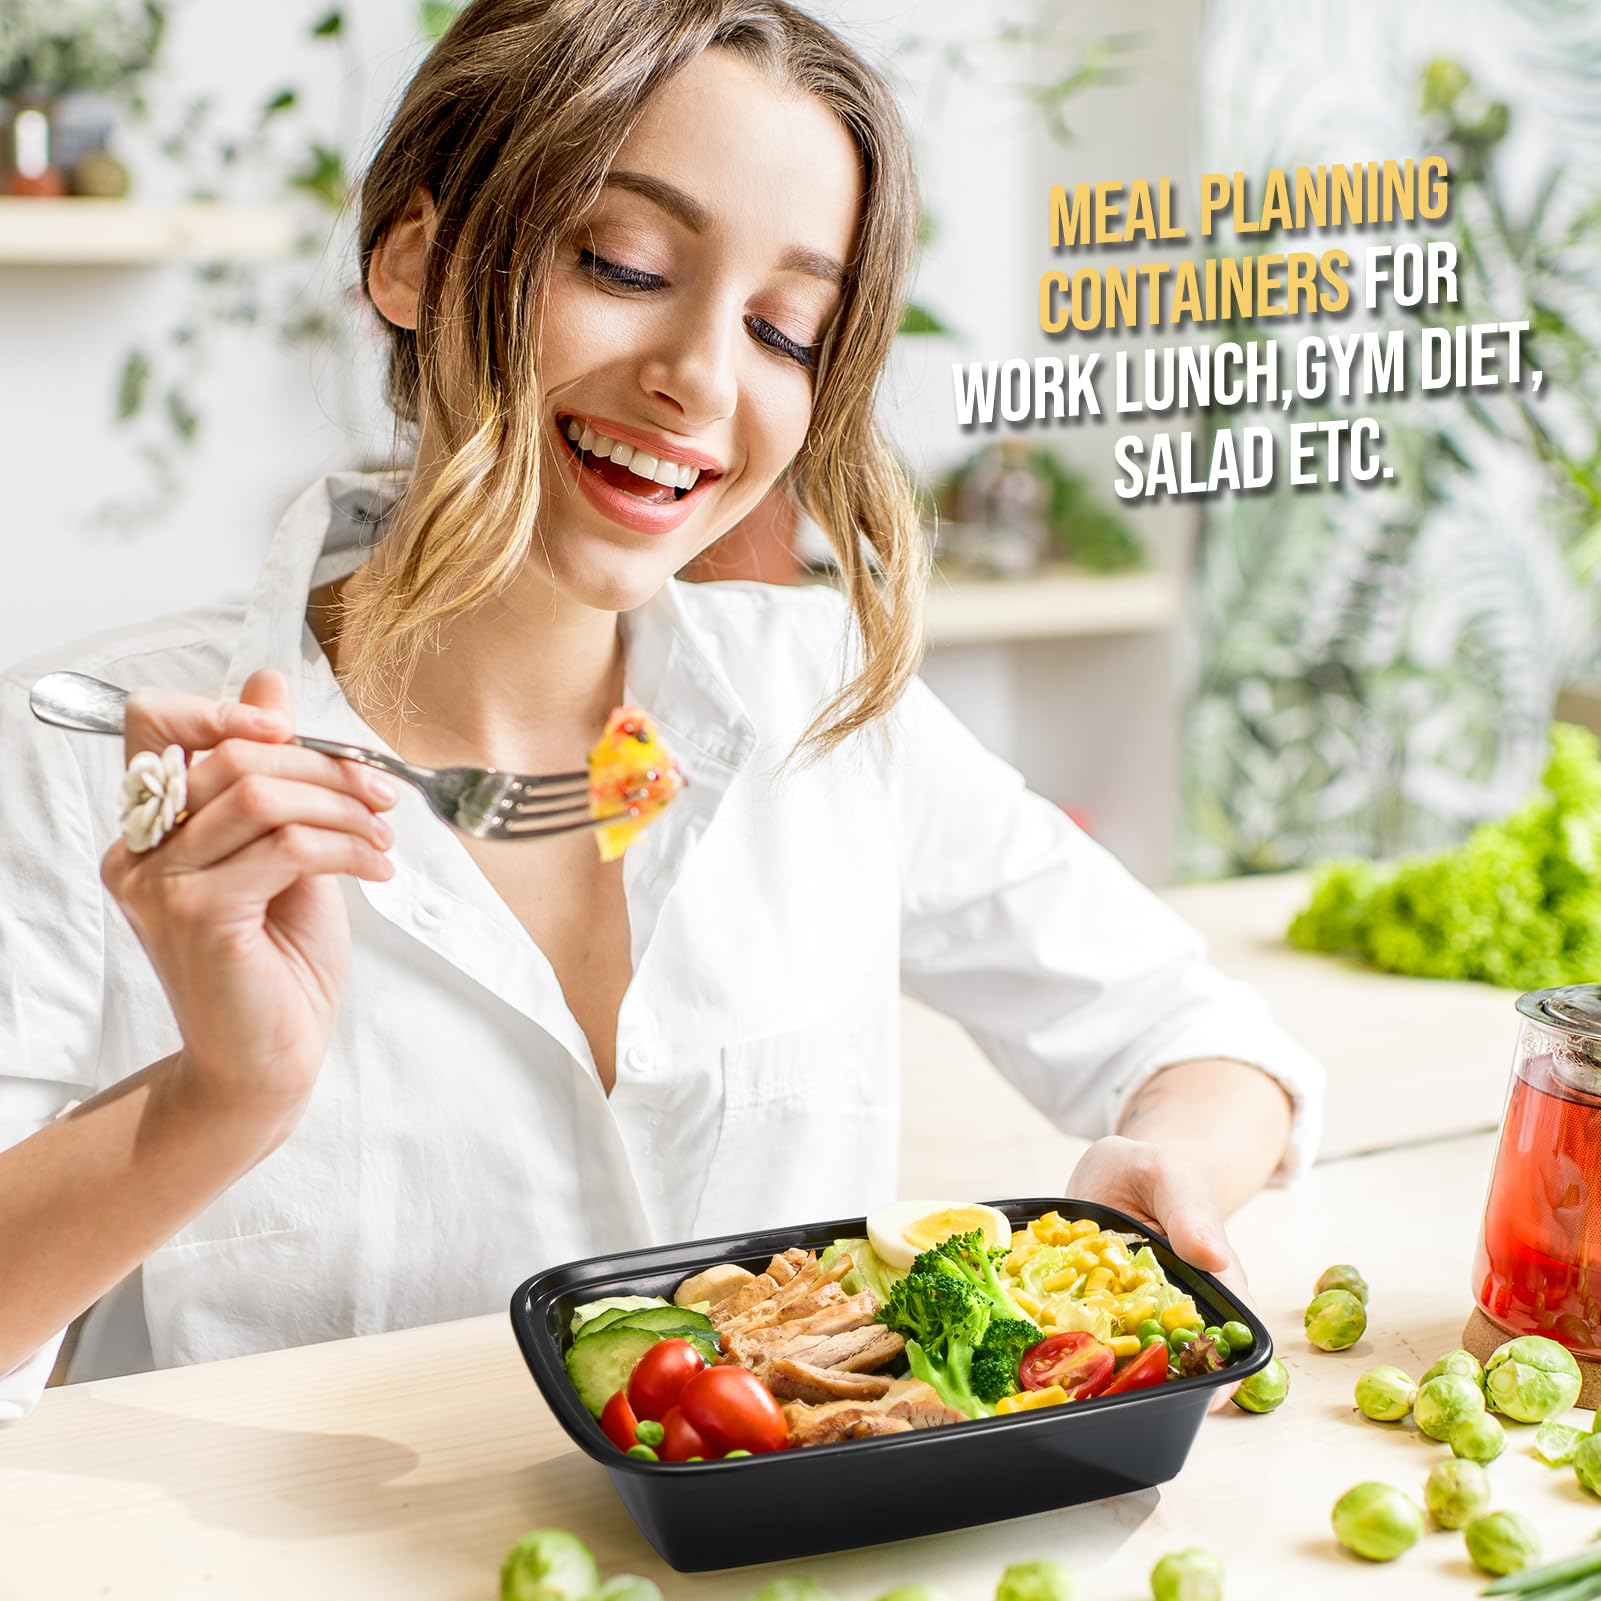 Glotoch 50 Pack【34OZ】Meal Prep Container Microwave Safe,Upgrade Durable Food Storage Containers With Lids,To Go Containers For Lunch/Takeout/Travel BPA-free, Stackable,Dishwasher/Freezer Safe